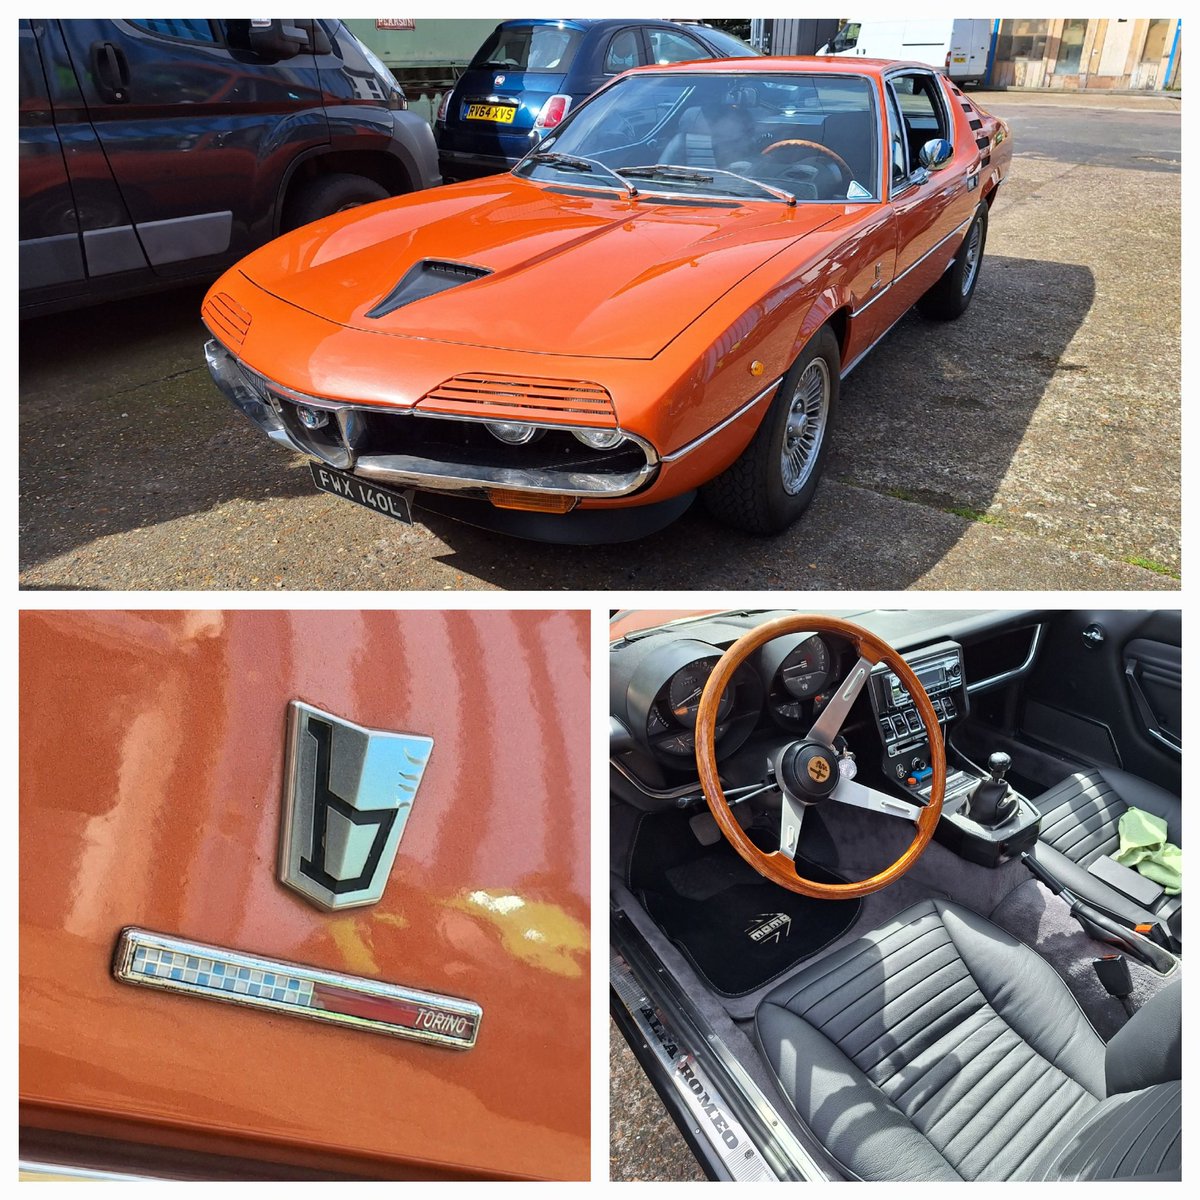 Today's object of interest (and desire?) at the neighbouring workshop. 1974 Alfa Romeo Montreal v8, Bertone styled. Mechanical injection. Was basically two 1.3L 4 cylinder engines put together.